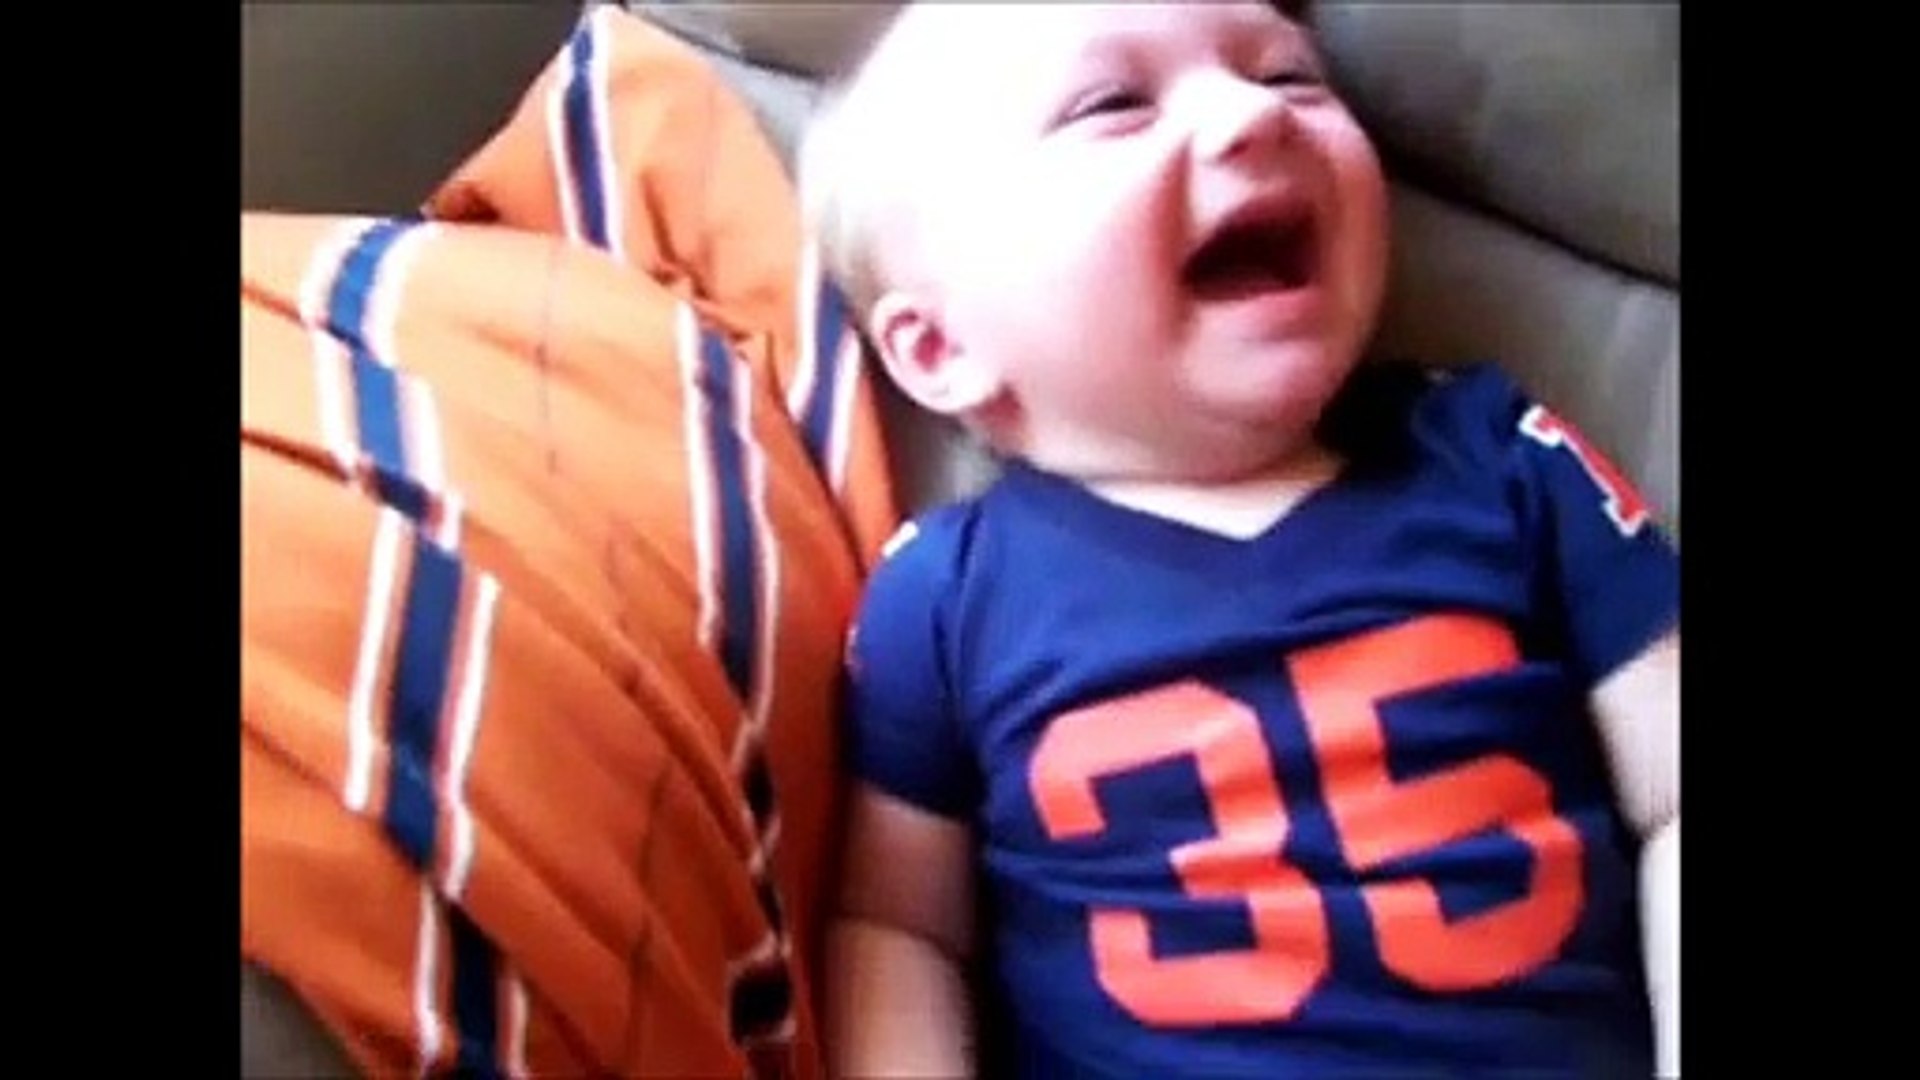 FUNNY BABY VIDEOS Download - Video Dailymotion - video Dailymotion